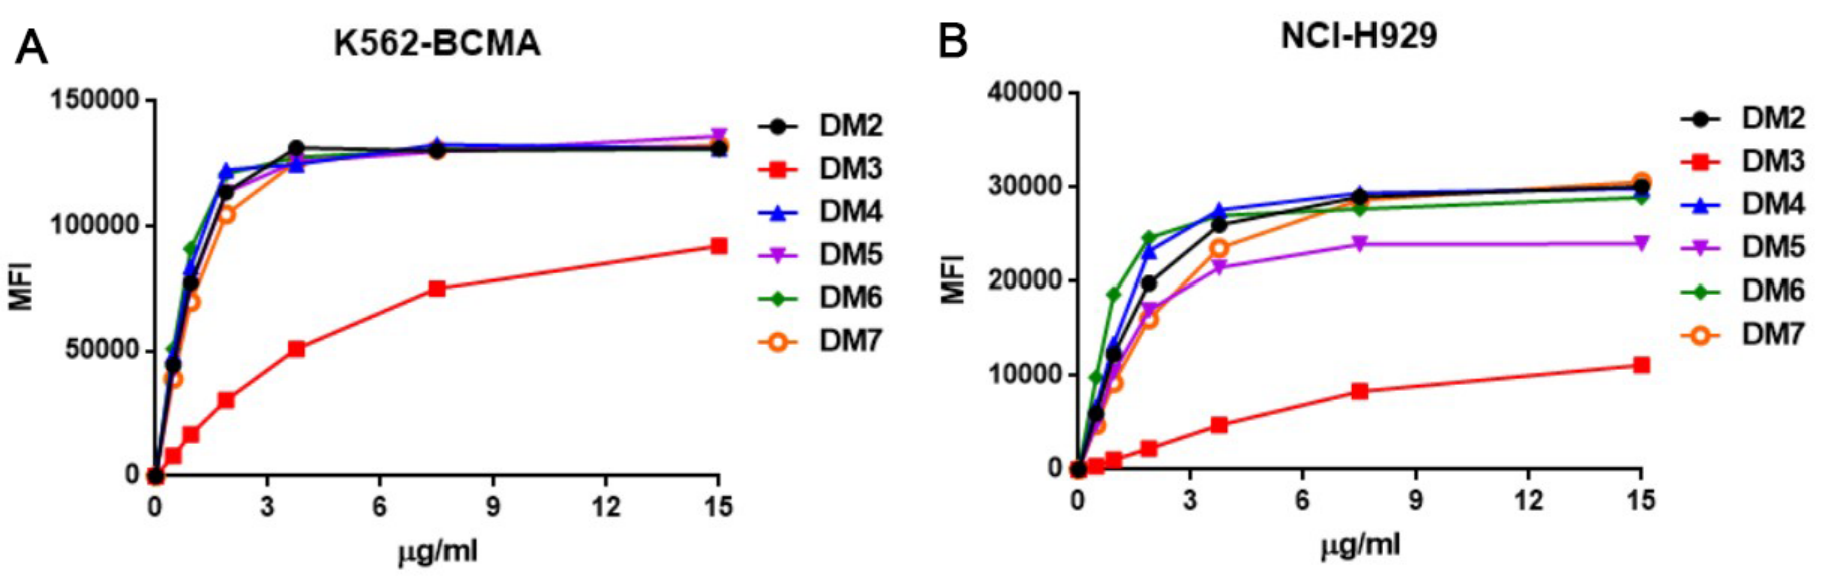 DME100006-BCMA-Fig4.png